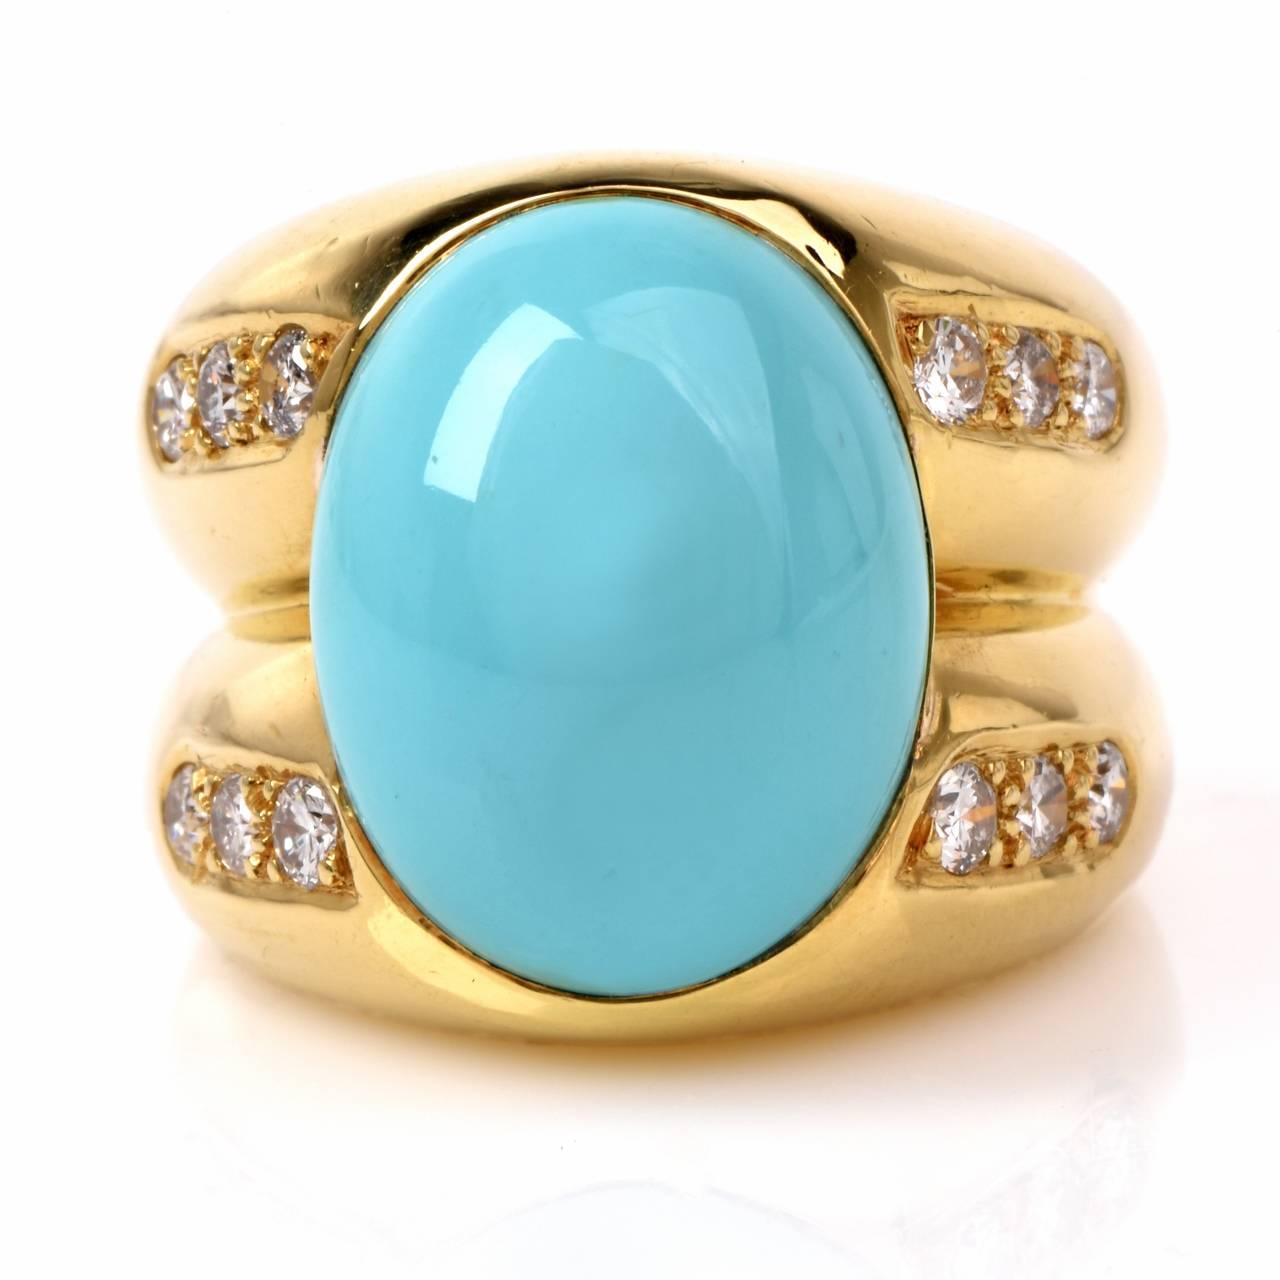 This 1960s retro cocktail ring with  a fine Persian turquoise cabochon and diamonds is crafted in solid 18K yellow gold. The ring weighs approx. 20.6 grams and measures 19mm wide x 13mm high. This fashionable ring exposes an eye-catching oval